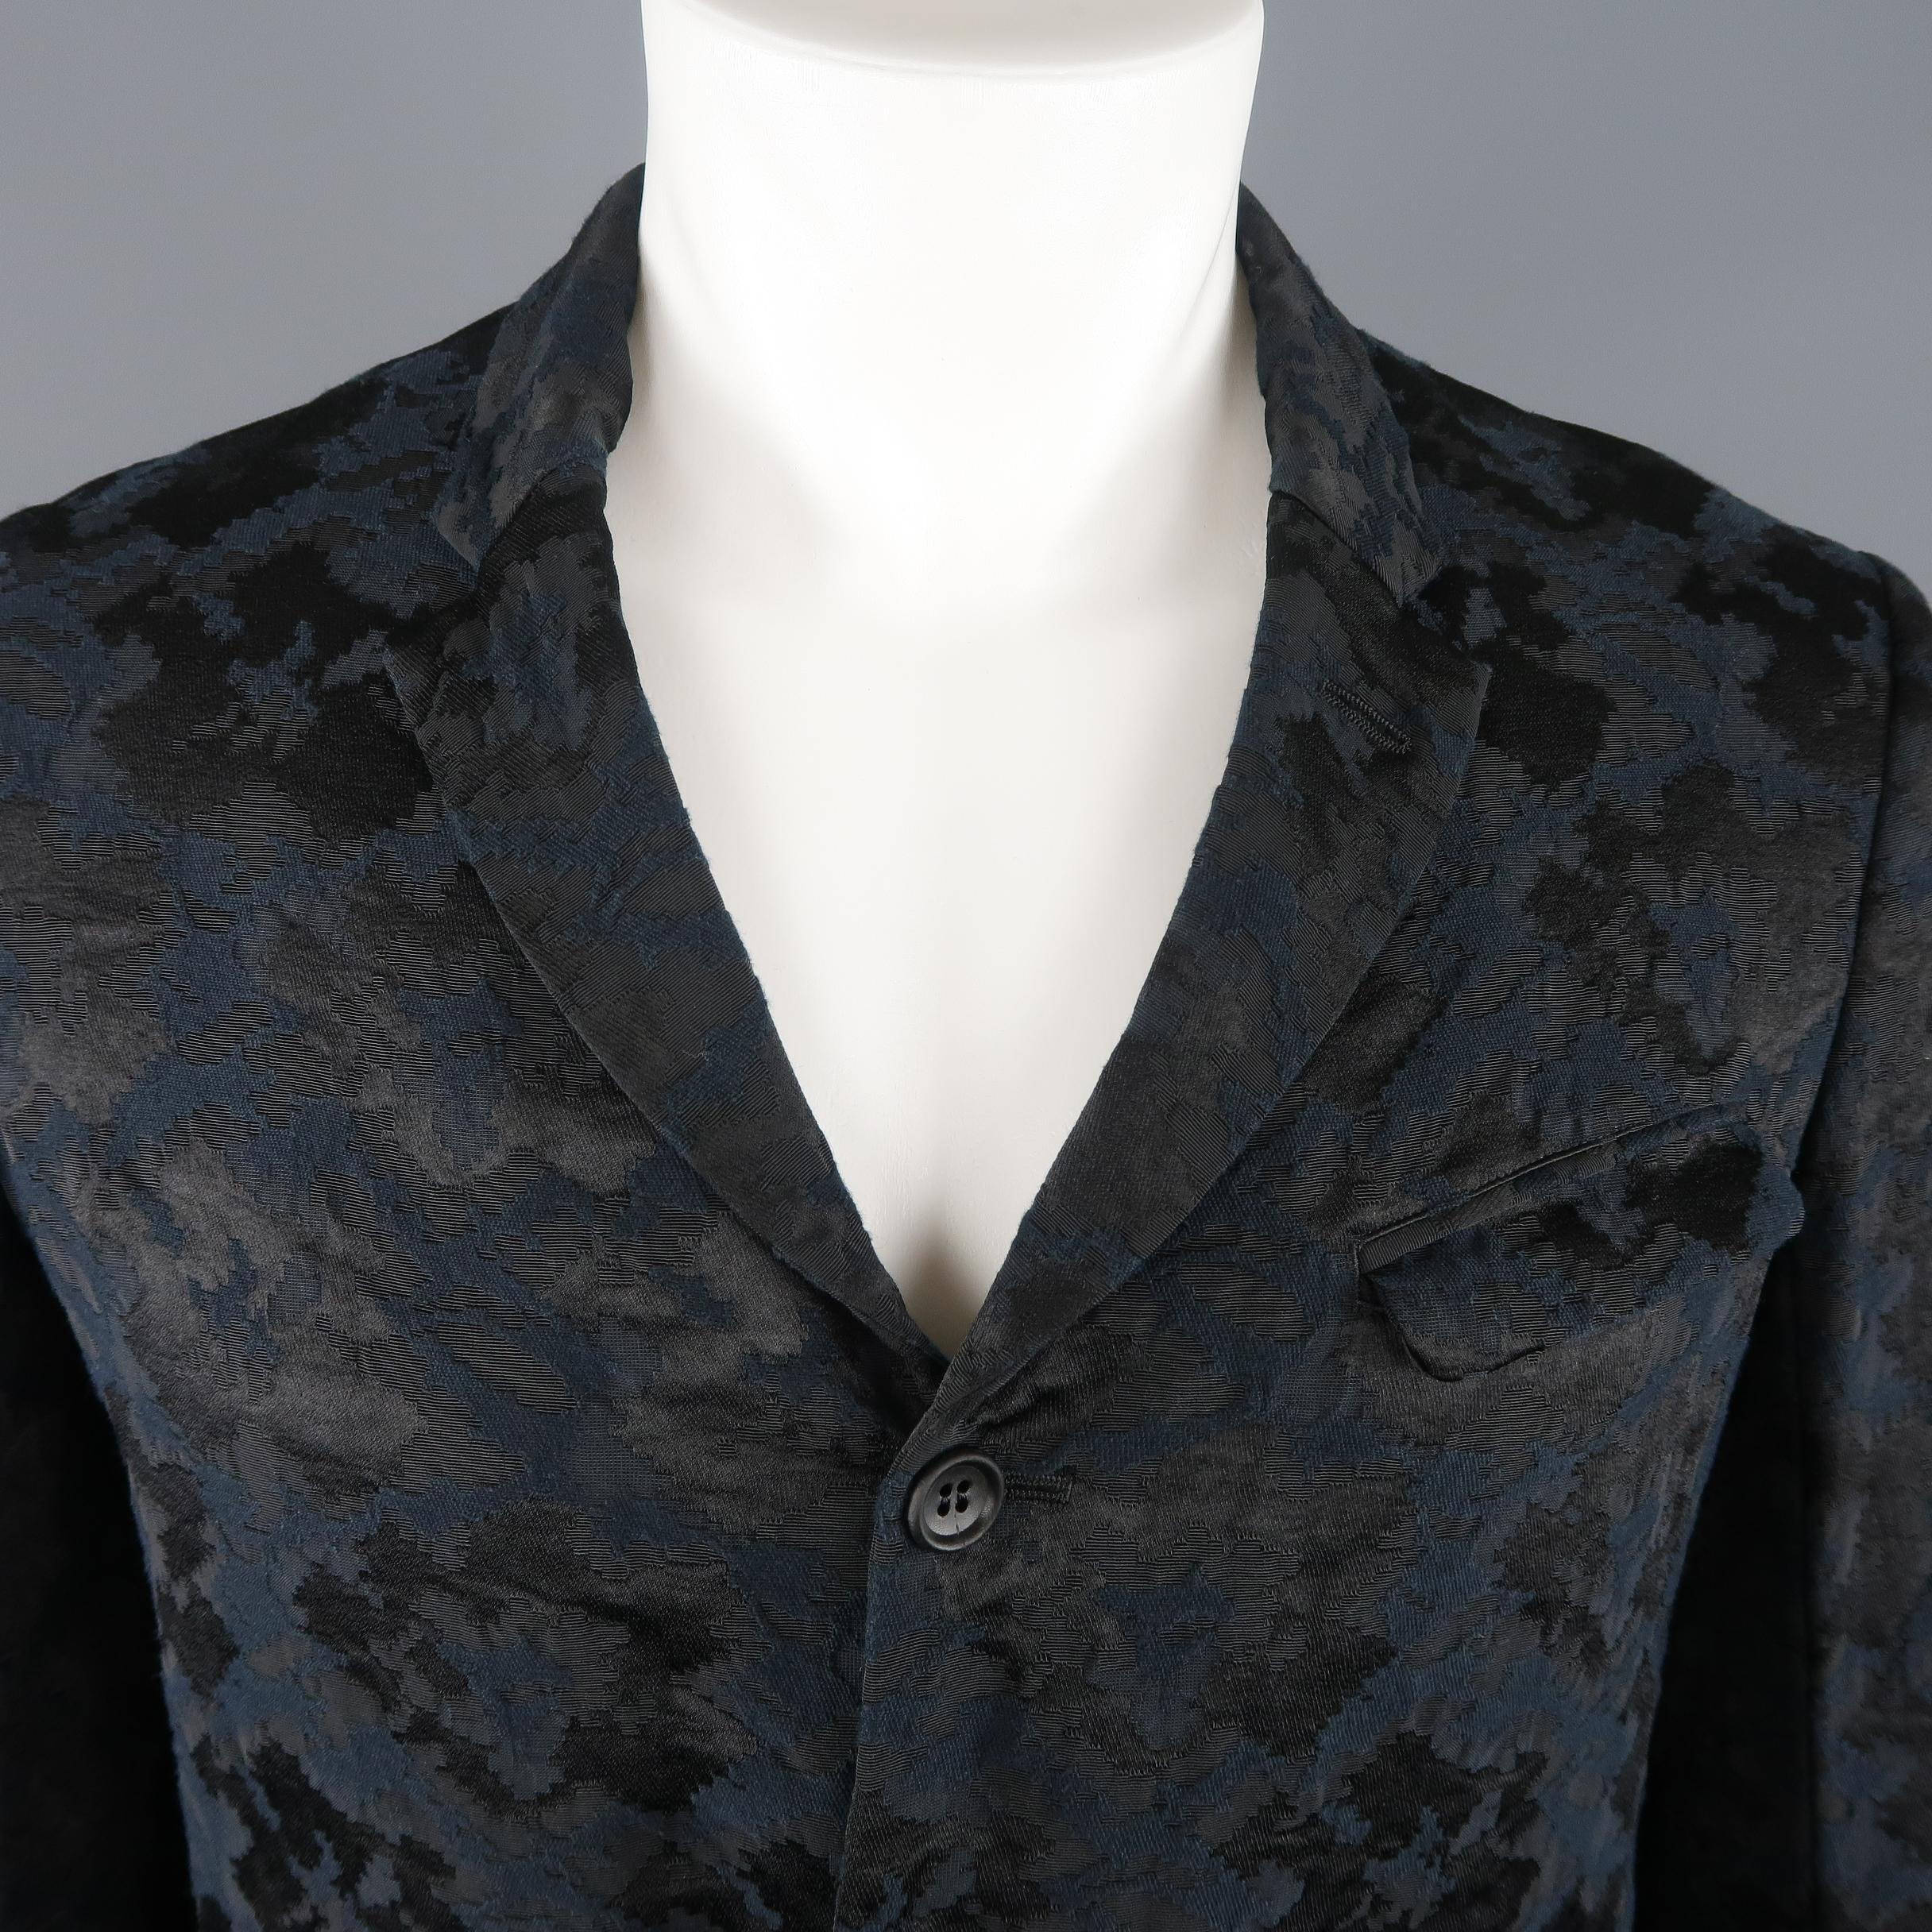 COMME des GARCONS HOMME PLUS sport coat comes in black and midnight navy blue jacquard fabric with a skinny pointed lapel, three button front, and rolled cuffs. Made in Japan.
 
Good Pre-Owned Condition.
Marked: M (AD 2011)
 
Measurements:
